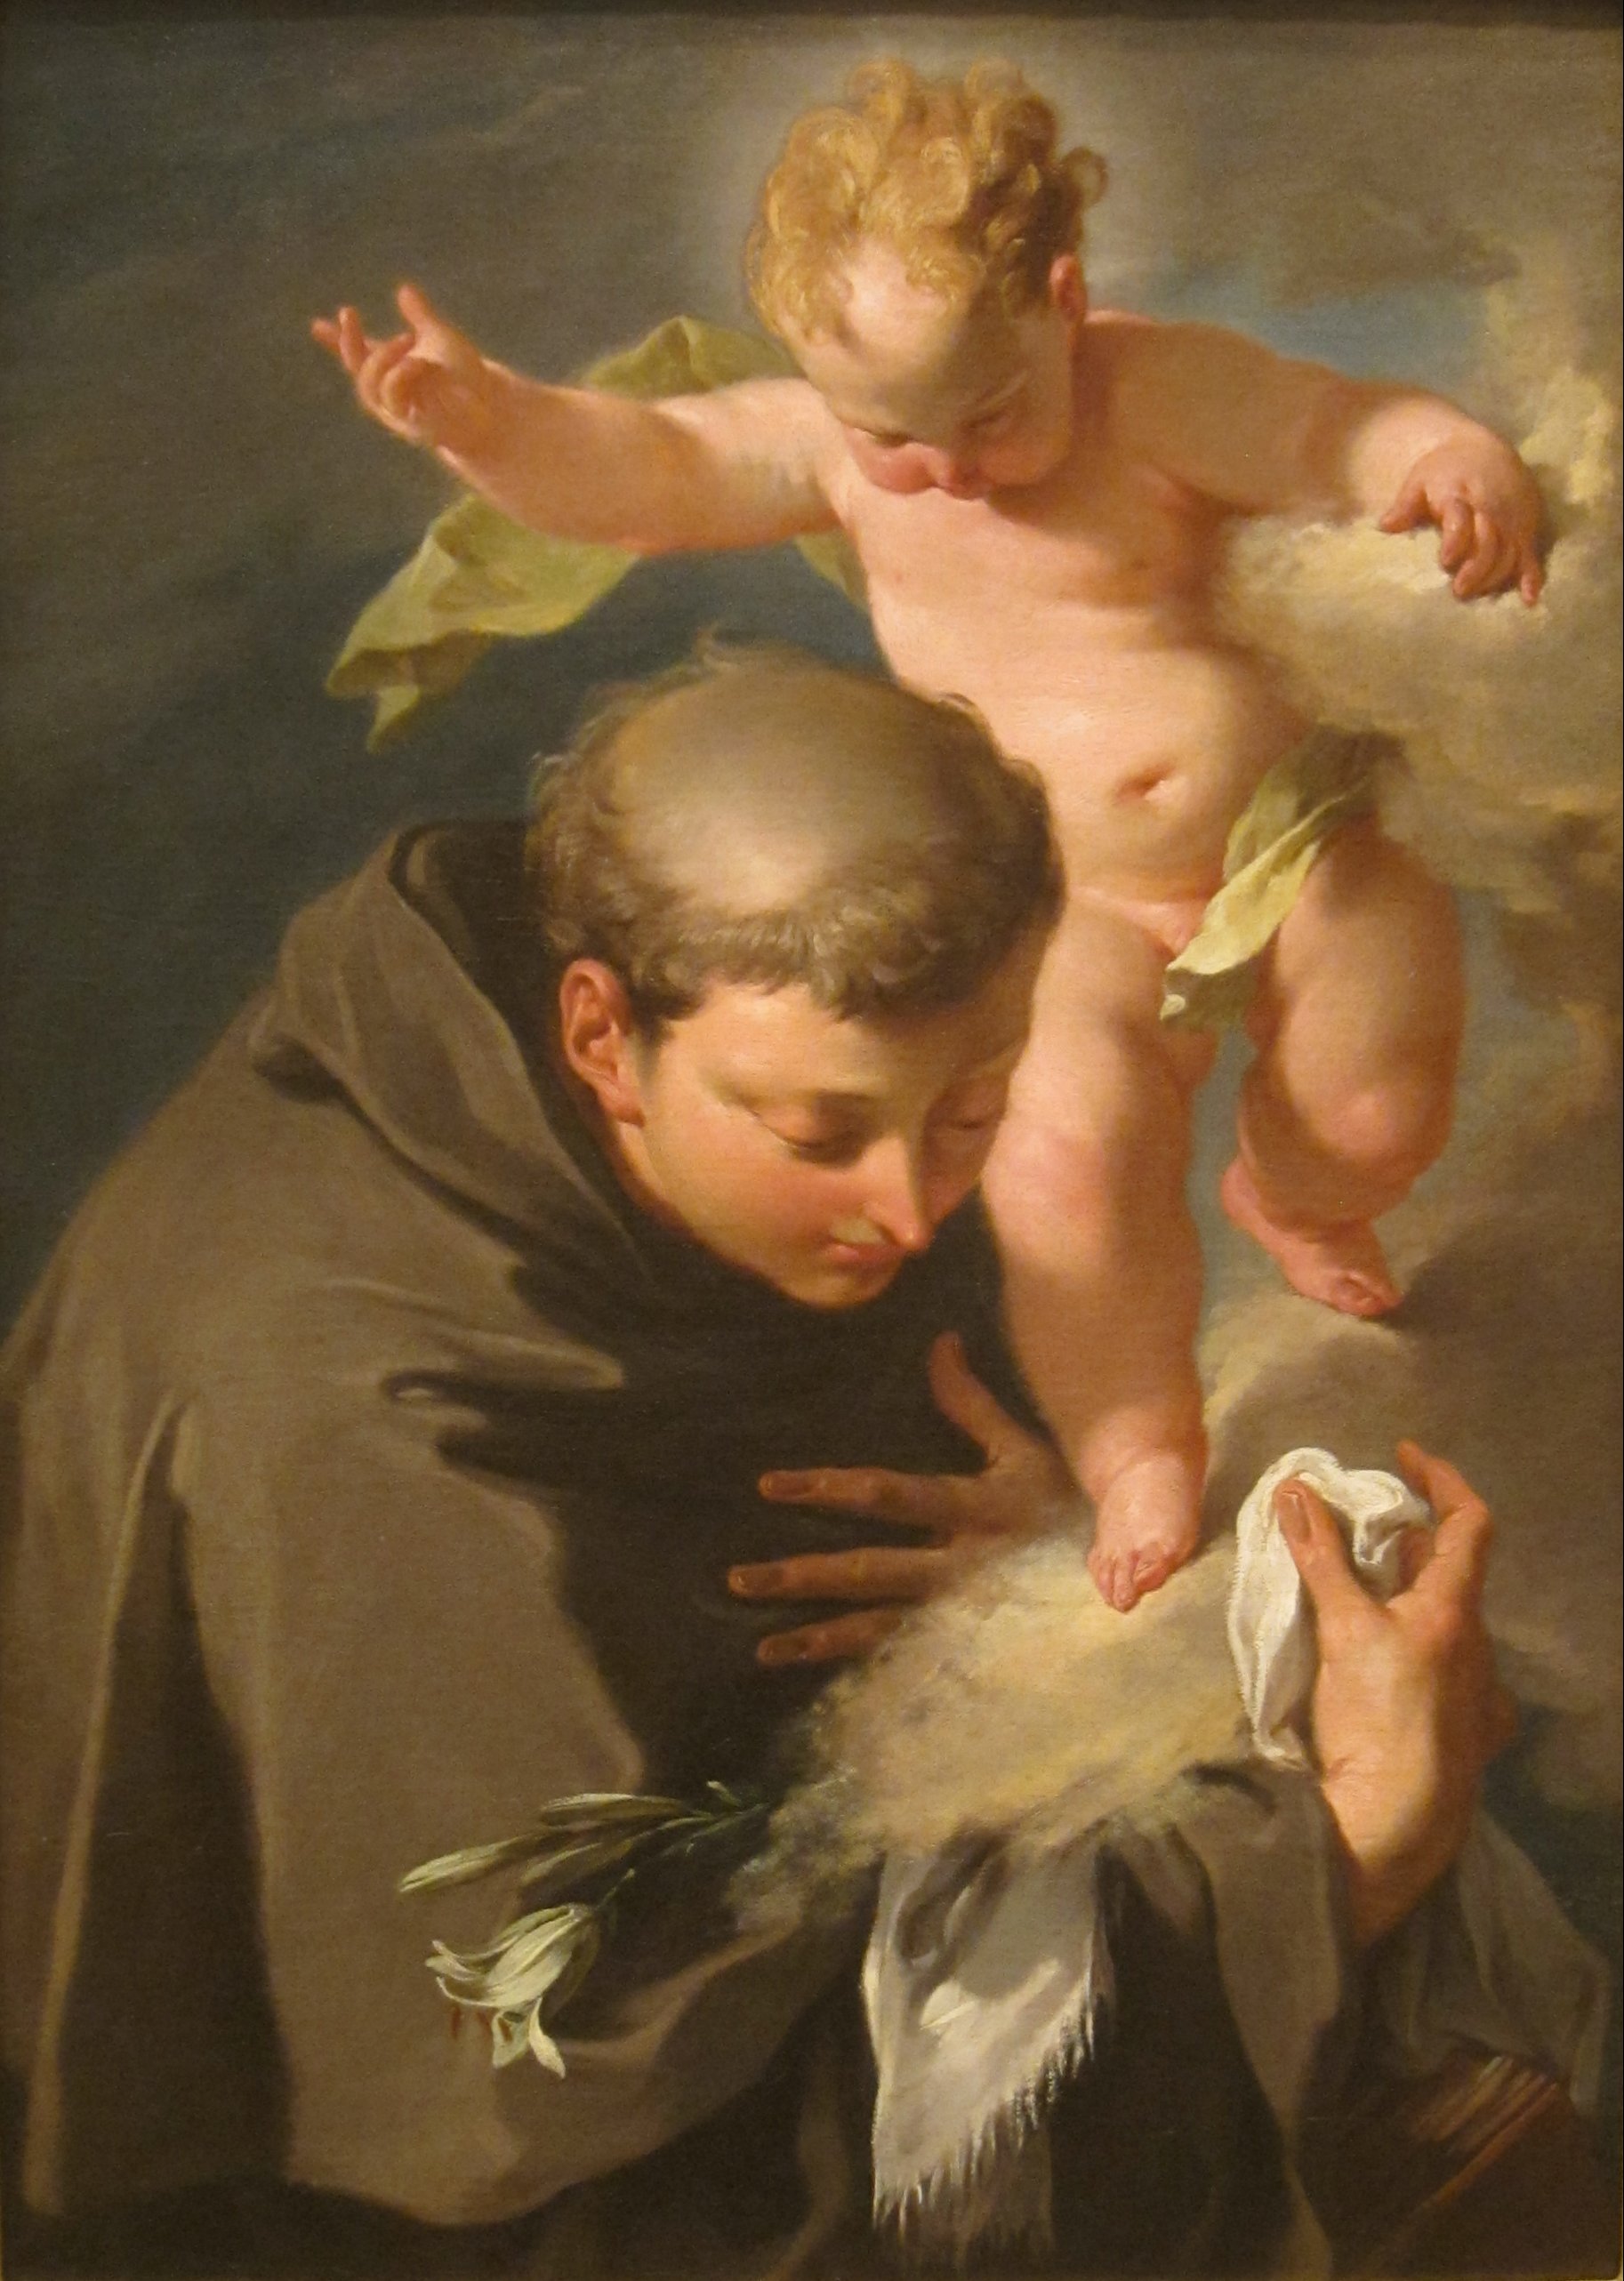 The Vision of Saint Anthony of Padua painting by Giovanni Battista Pittoni, San Diego Museum  dans immagini sacre